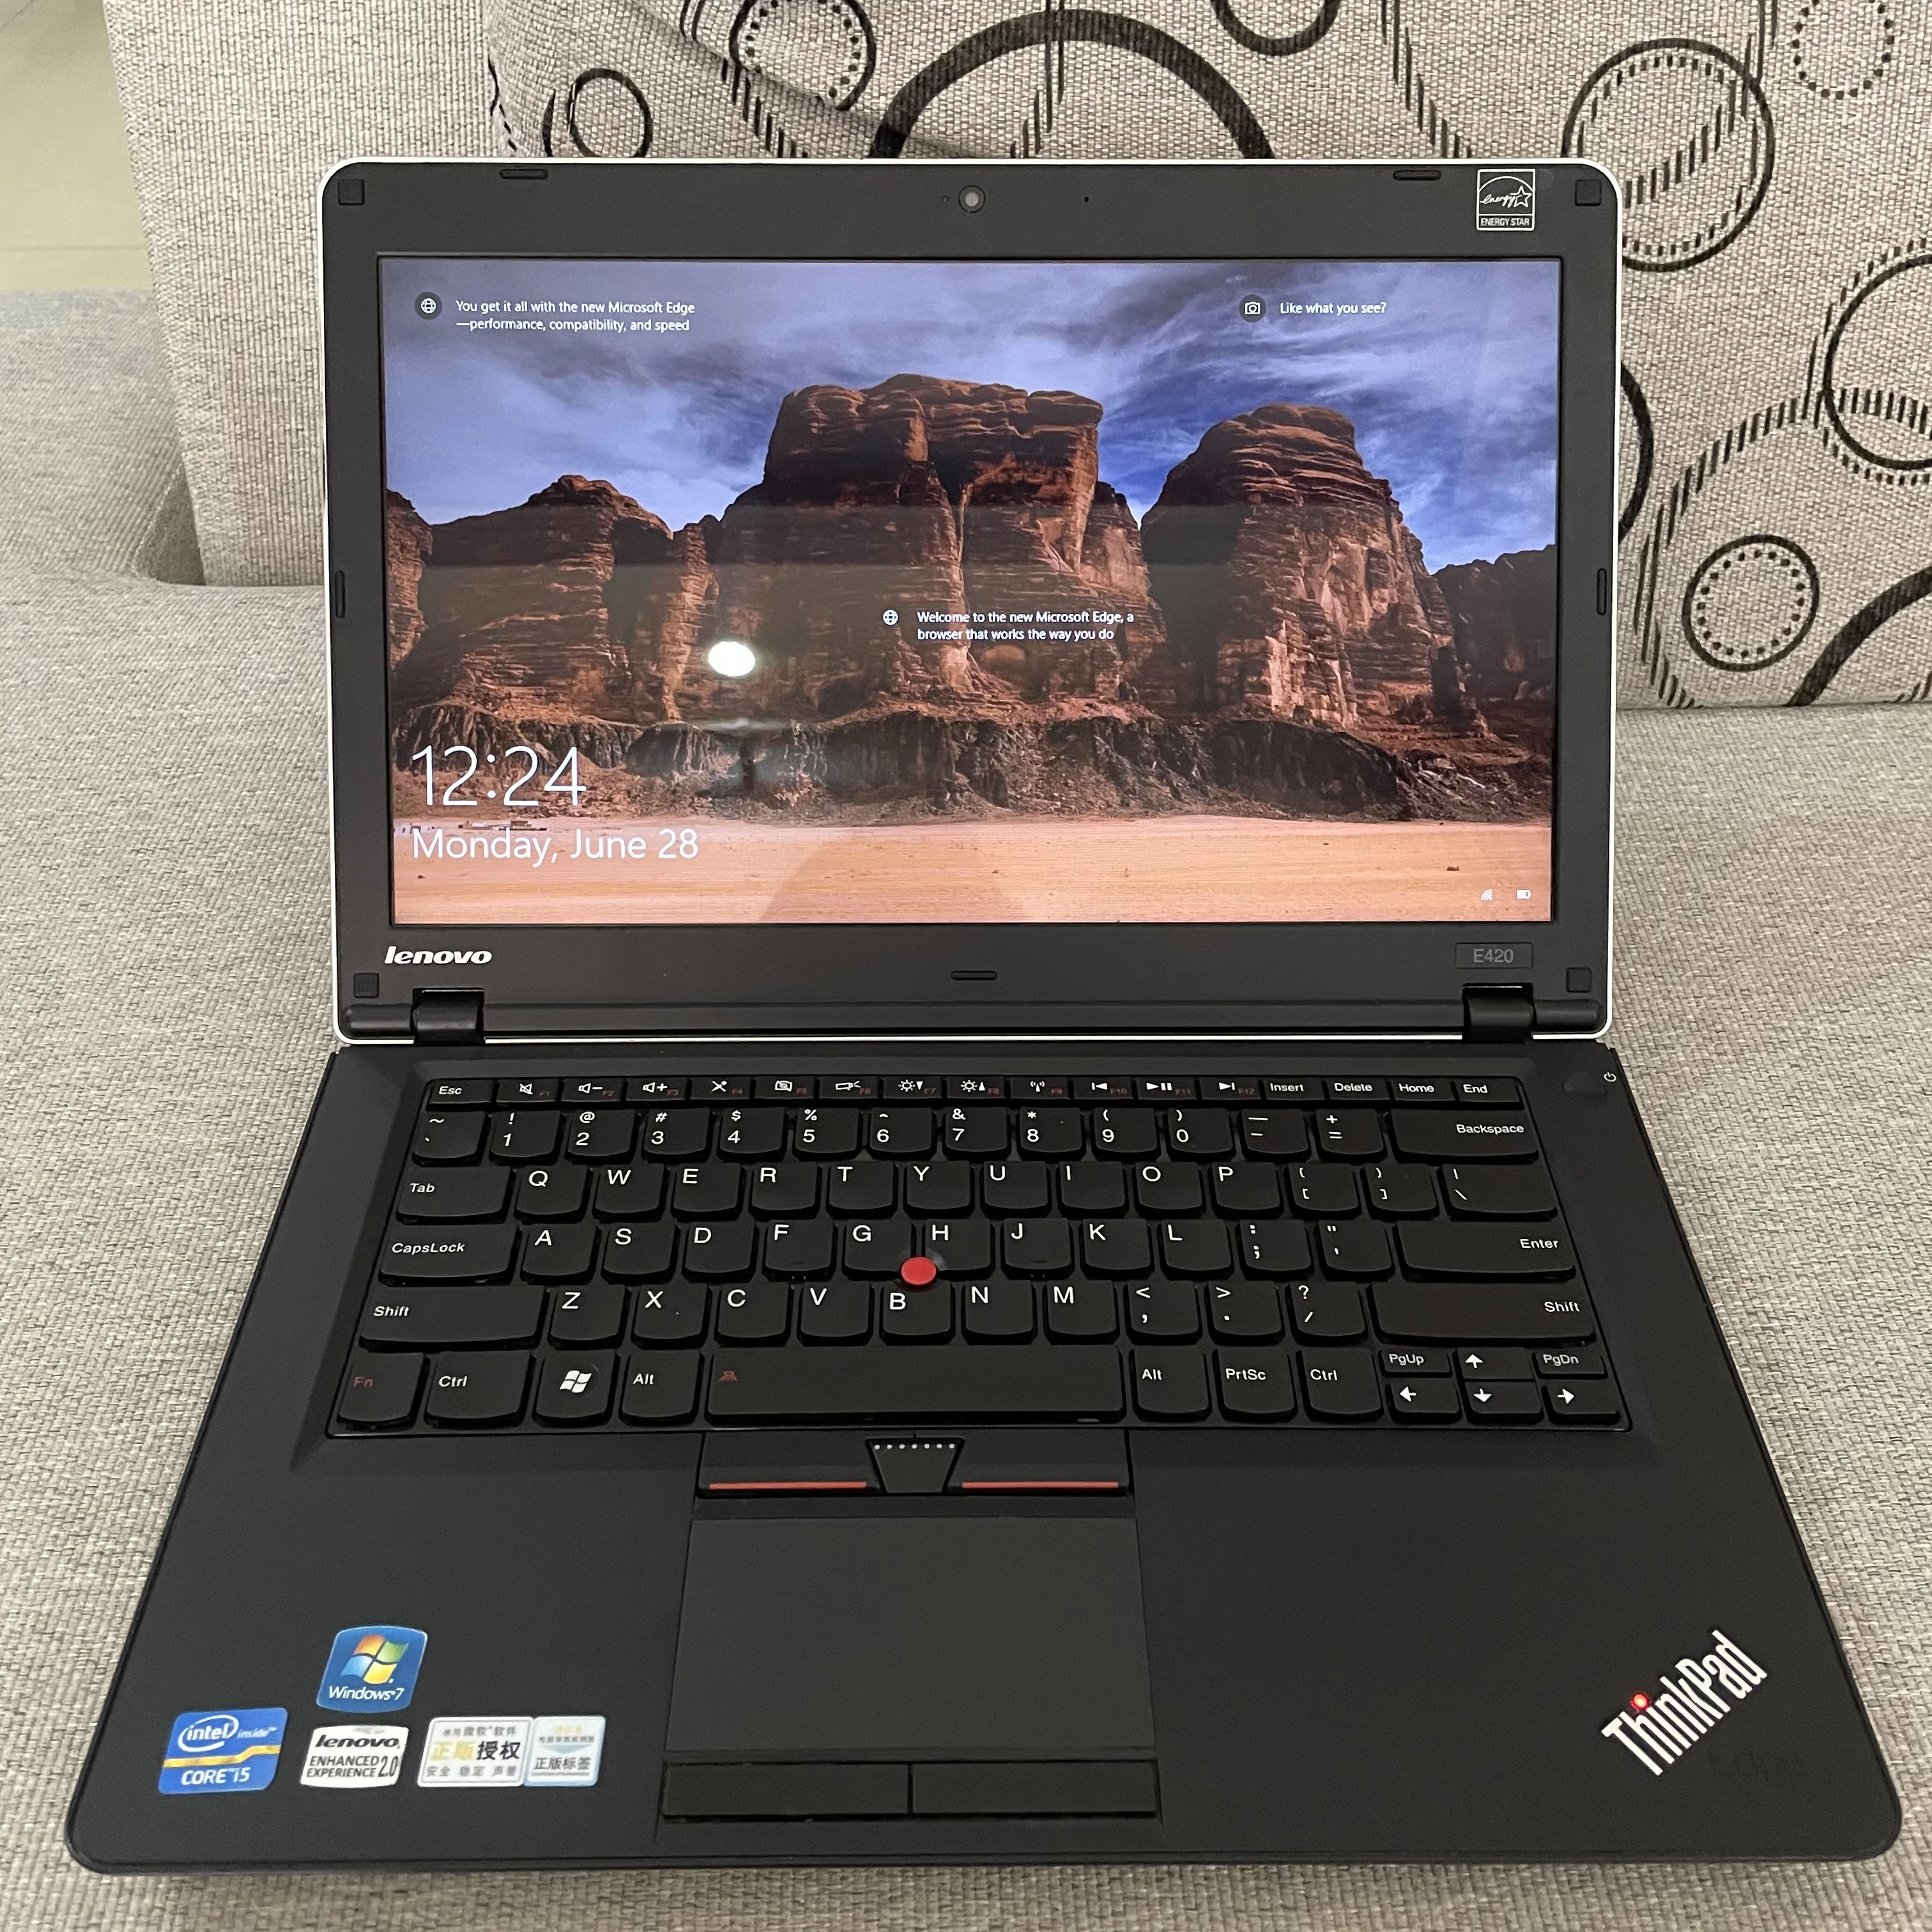 

Core I5 I7 Used computer Laptop E420 2nd gen Business Notebook computer win10 dual core refurbished second hand laptop Thinkpad